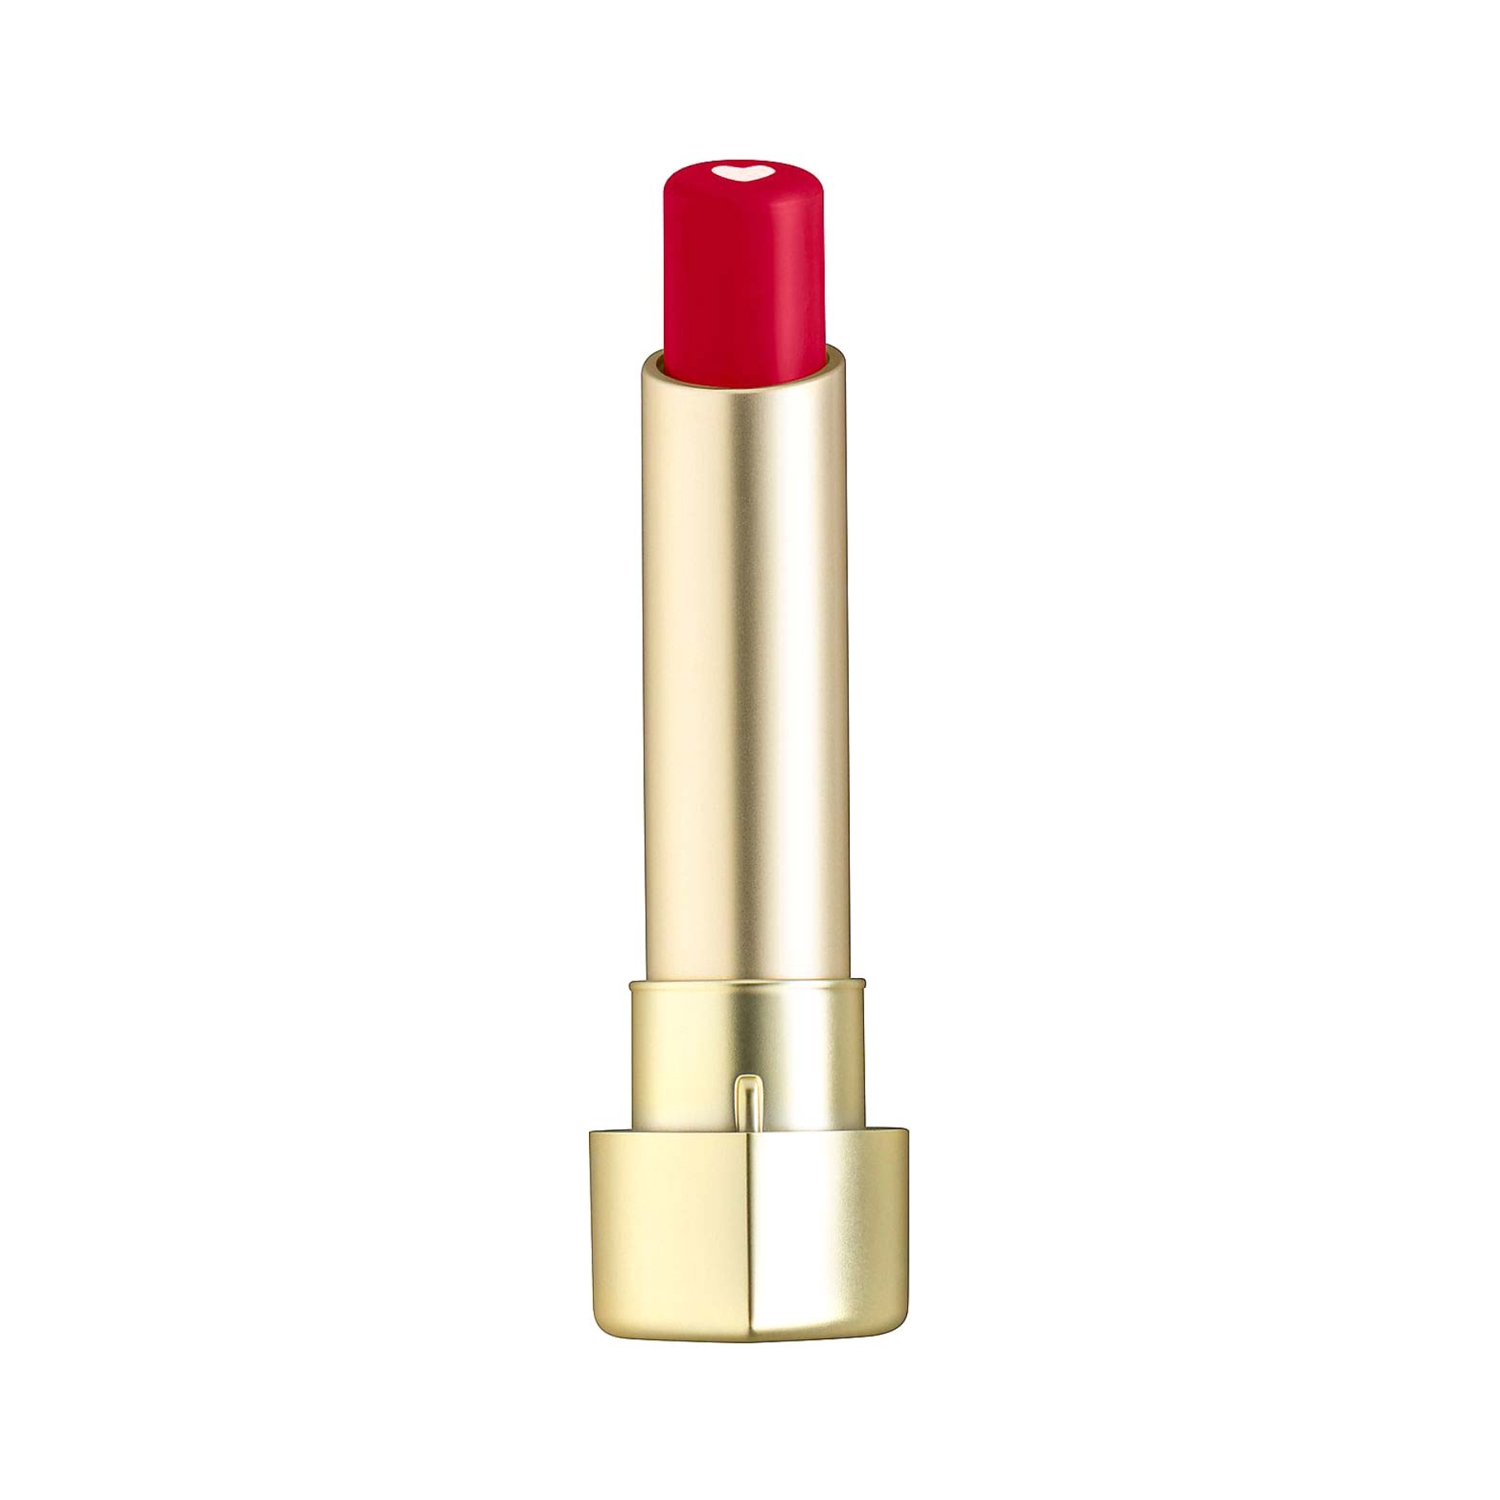 Too Faced | Too Faced Too Femme Heart Core Lipstick - Heart Core (2.8g)